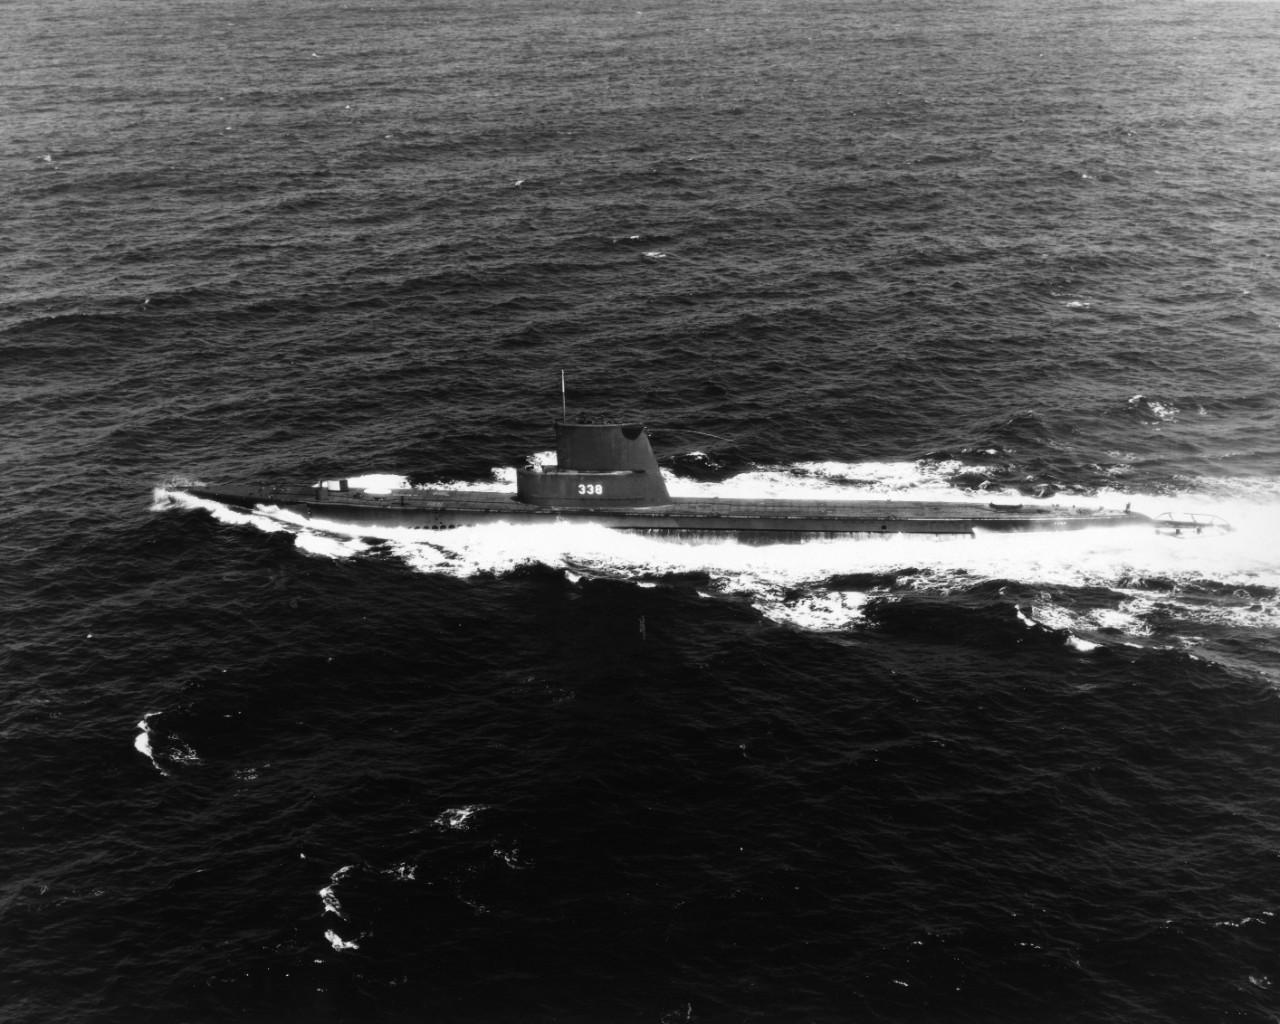 USS Carp (SS-338) on routine exercises approximately ten miles south-southwest of Pearl Harbor, Oahu.